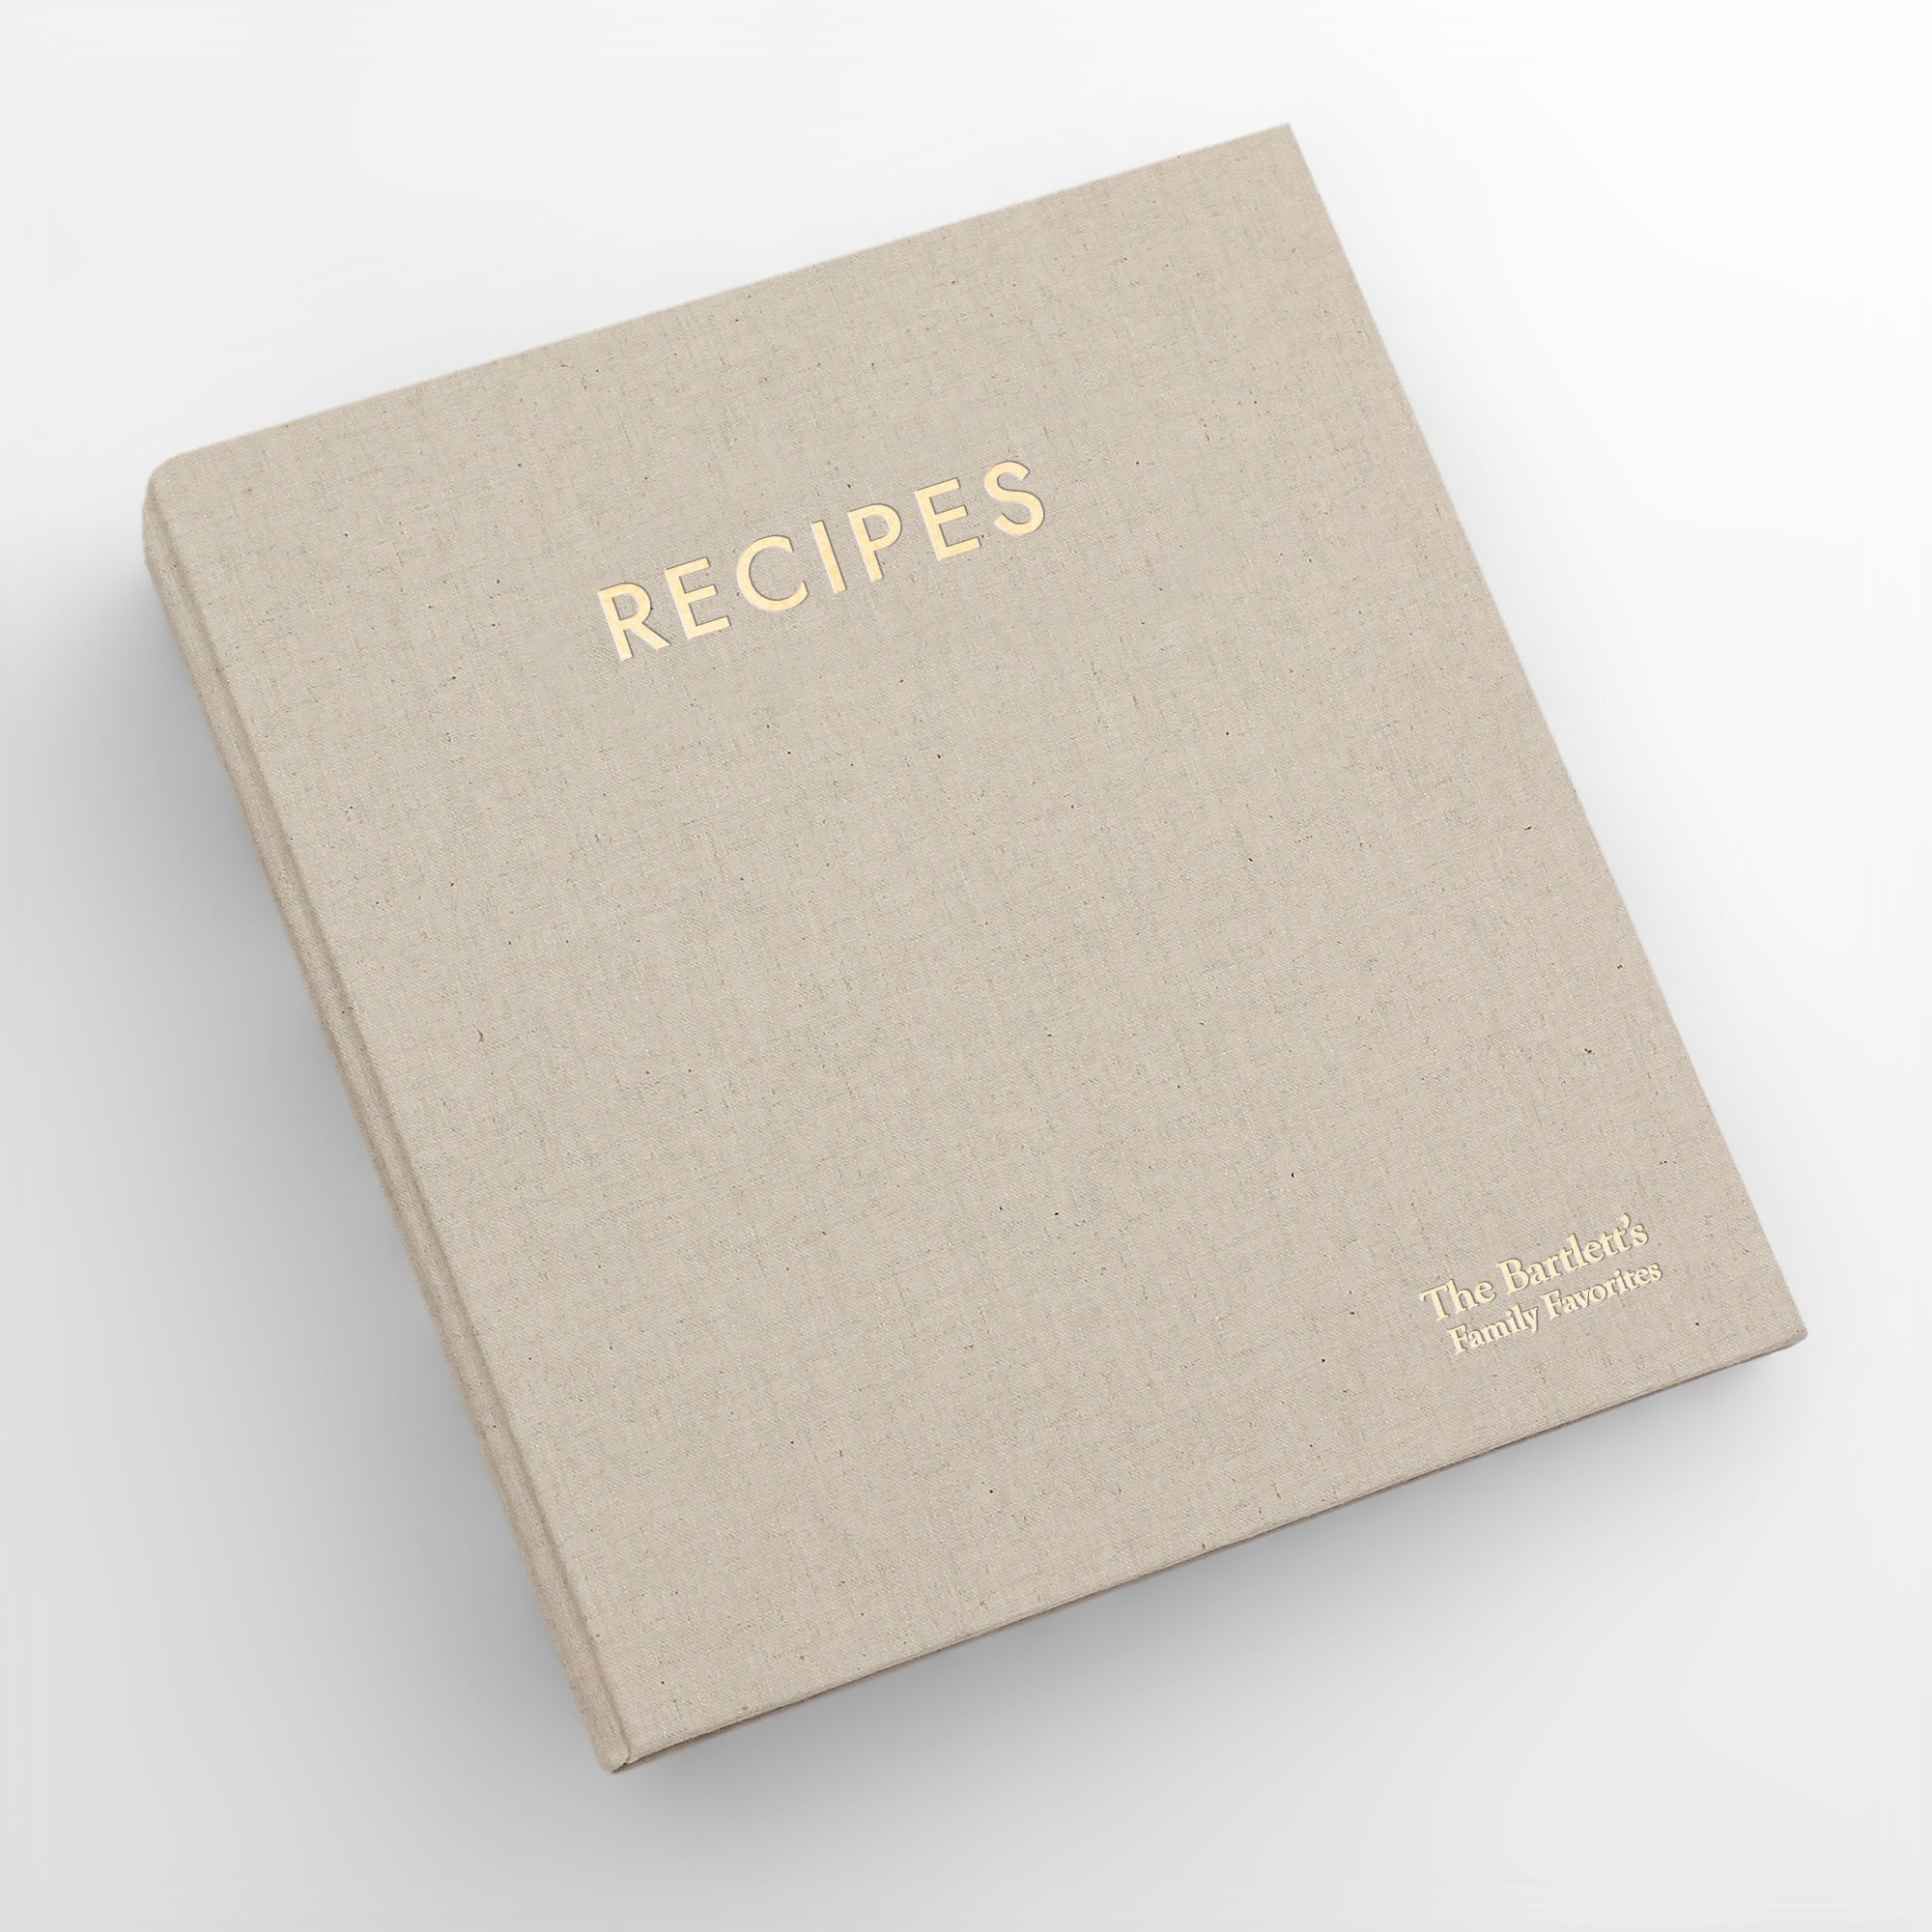 Our Family Recipes: My Recipe Book to Write in - Favorite Family Recipes  Journal by Favorite Family Recipes Journals